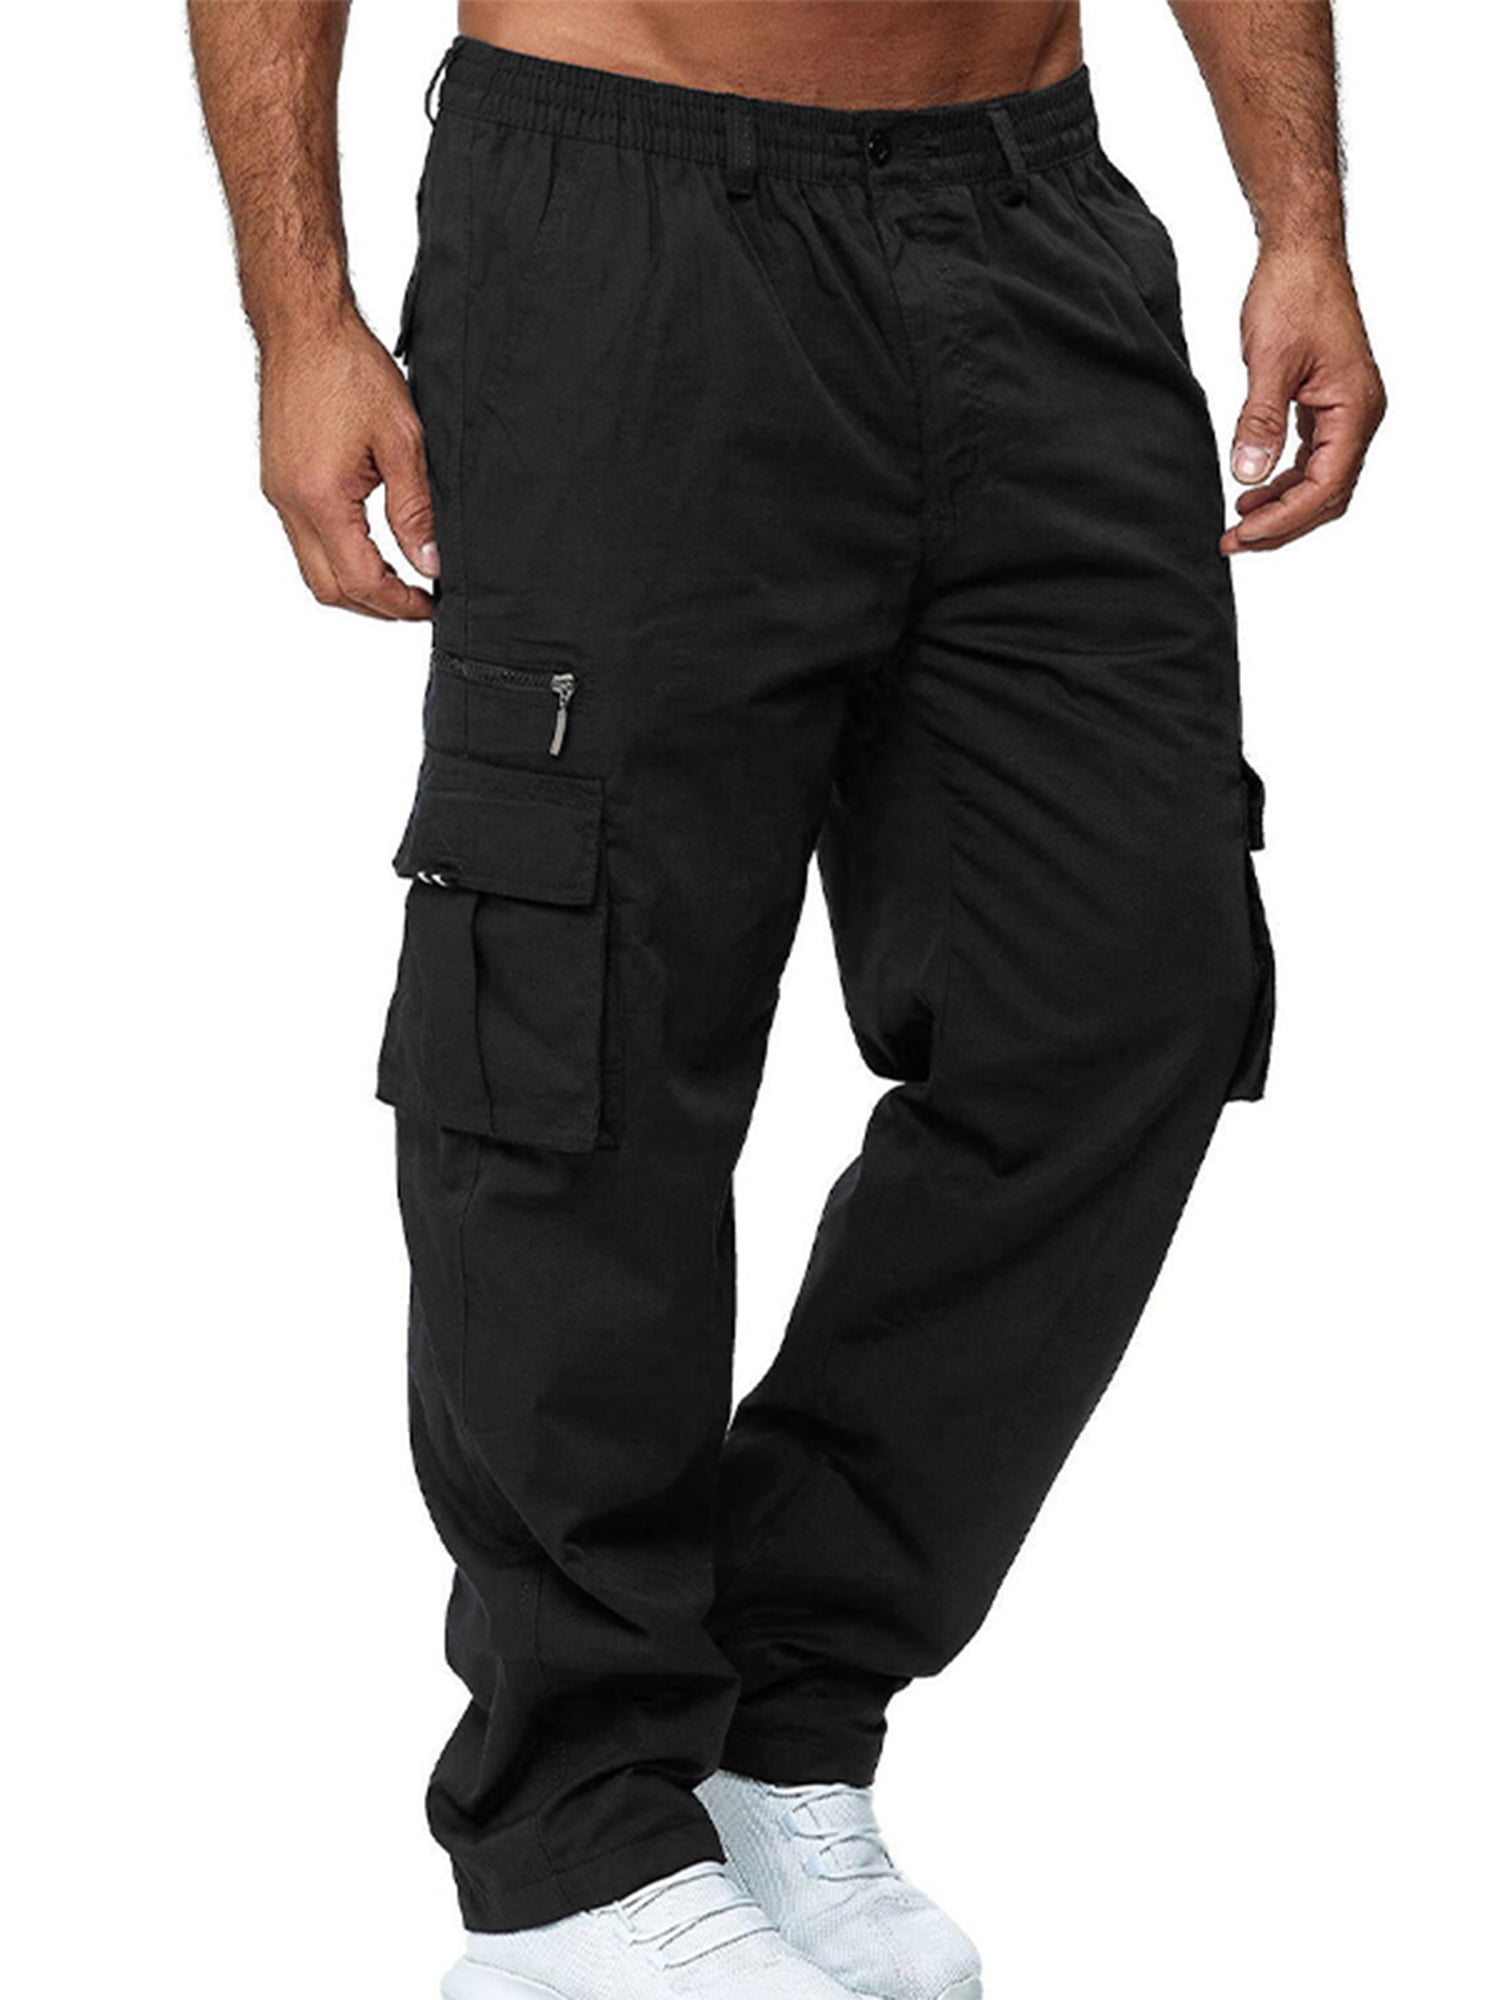 CoolWorks HiVis Mens Ventilated Cargo Work Pants CW2BLAK  Black  Work  Authority